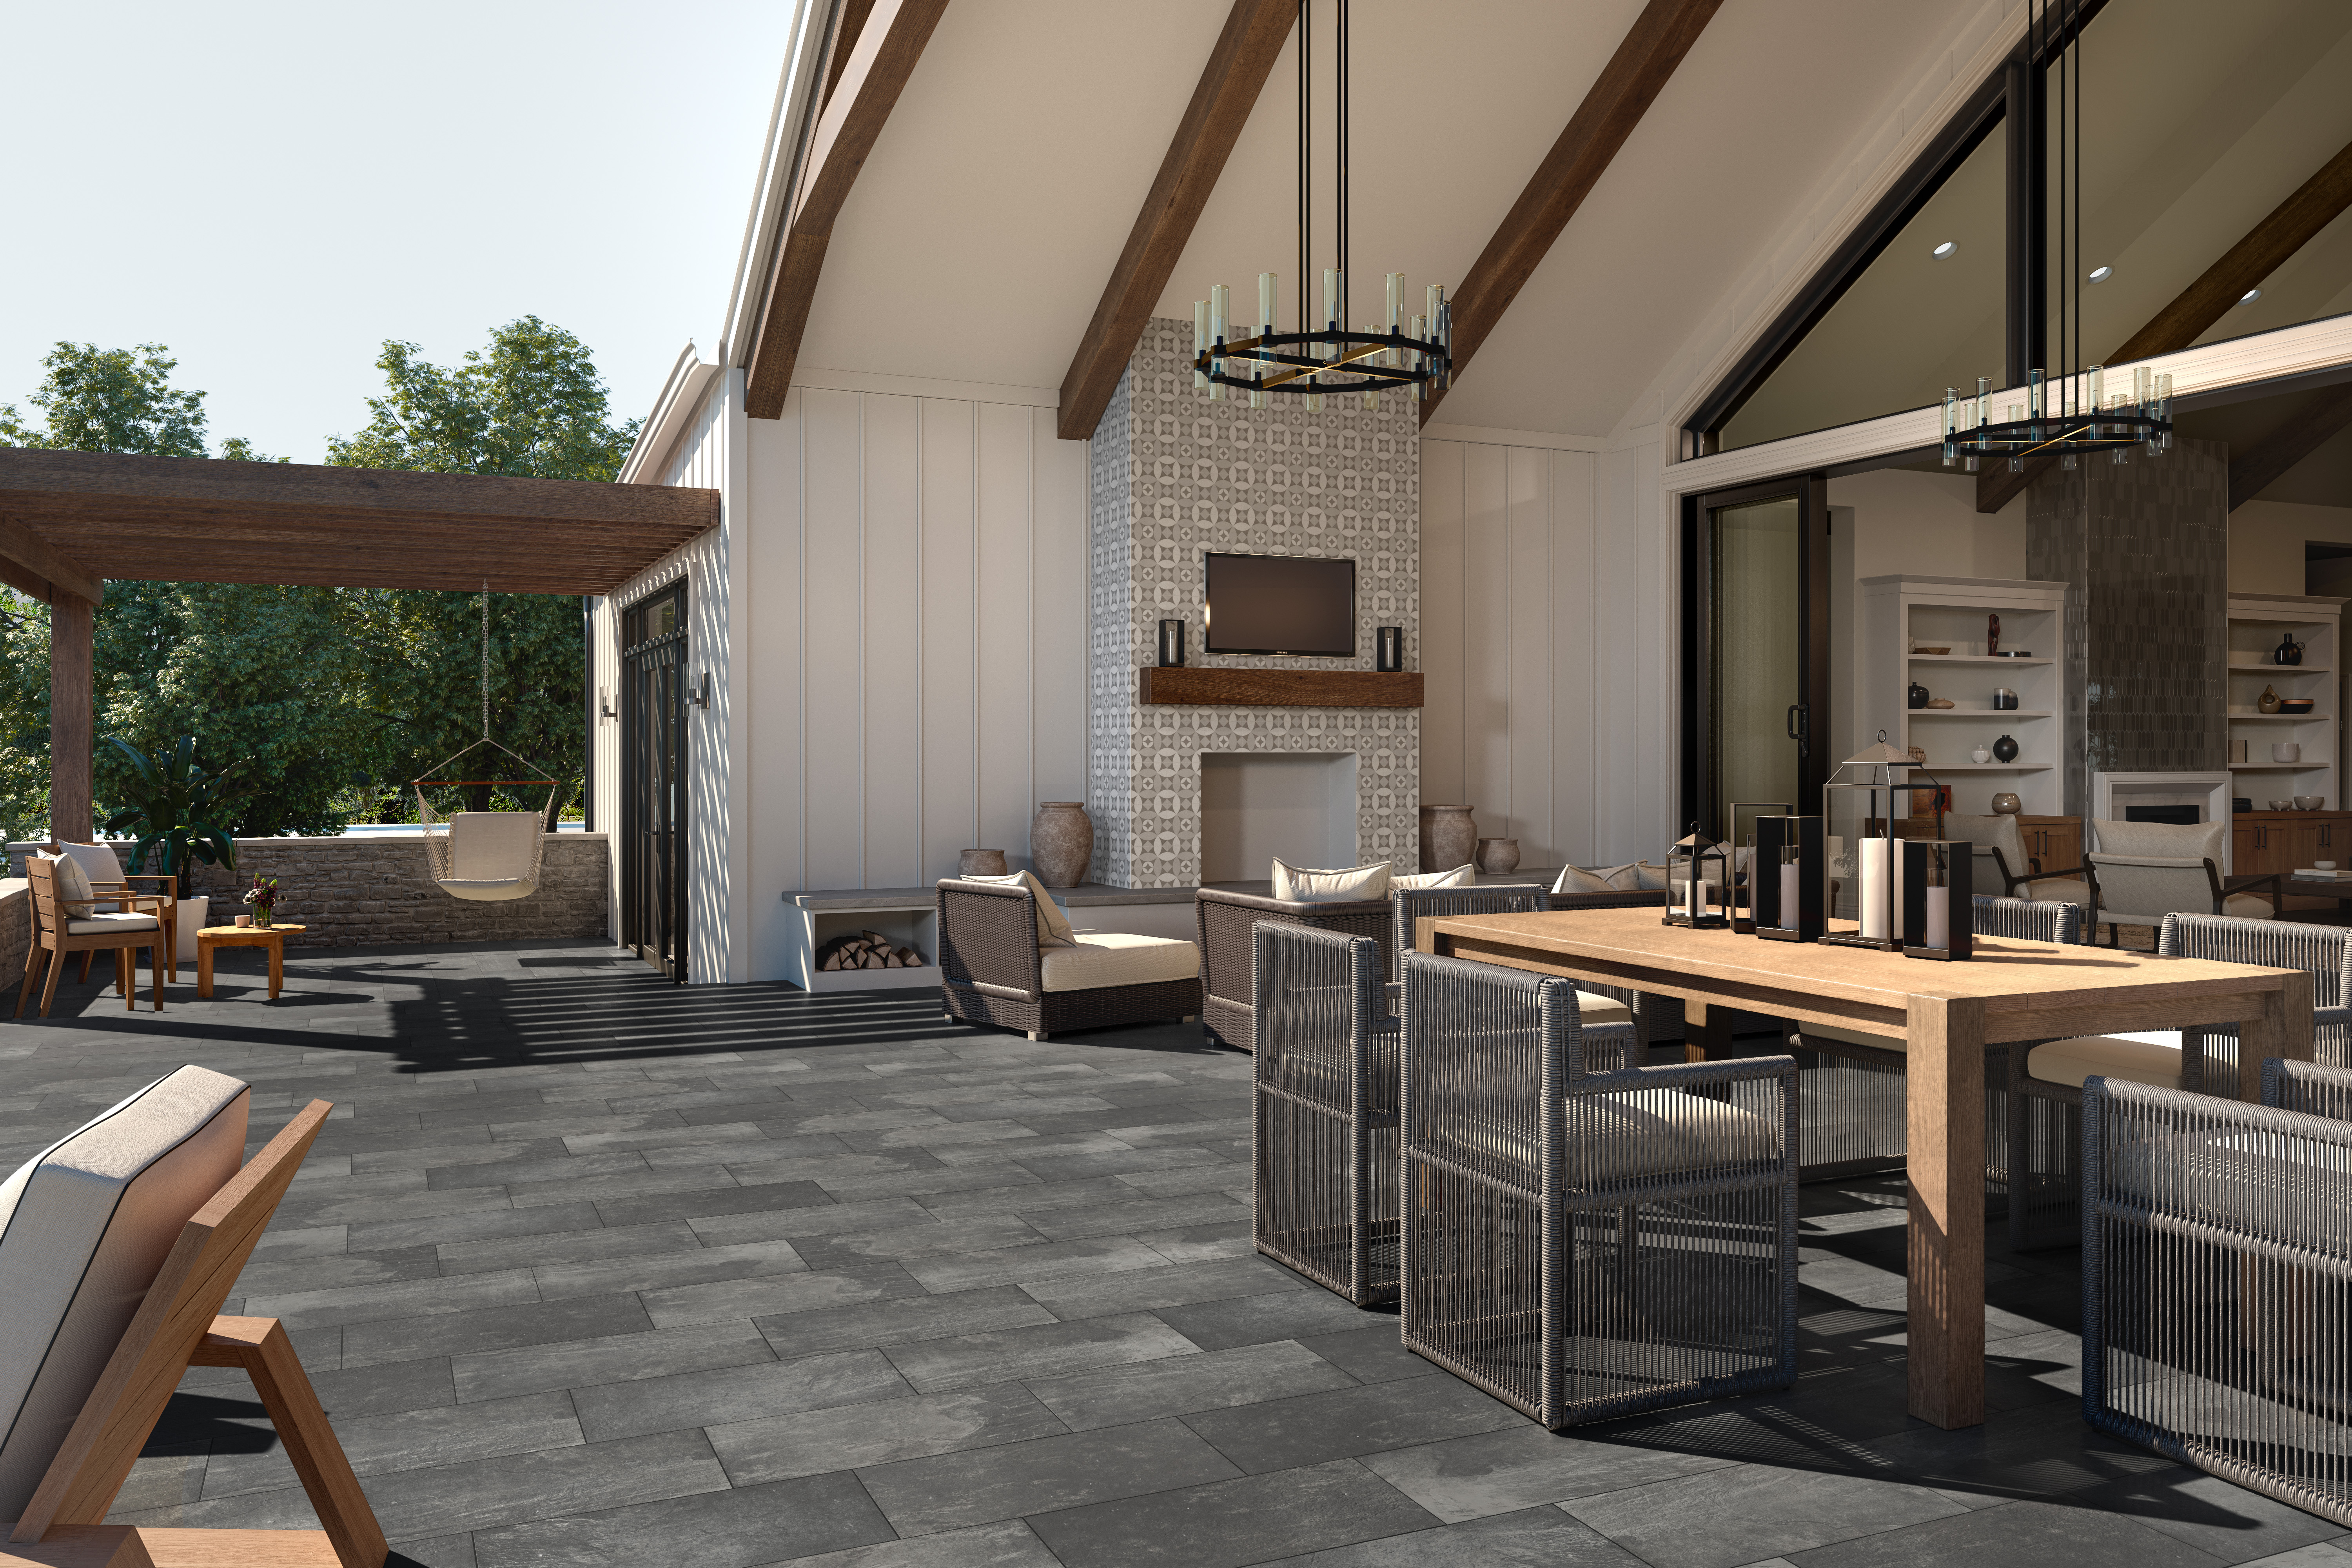 Outdoor porcelain patio featuring outside bar, decor, greenery by Emser Tile